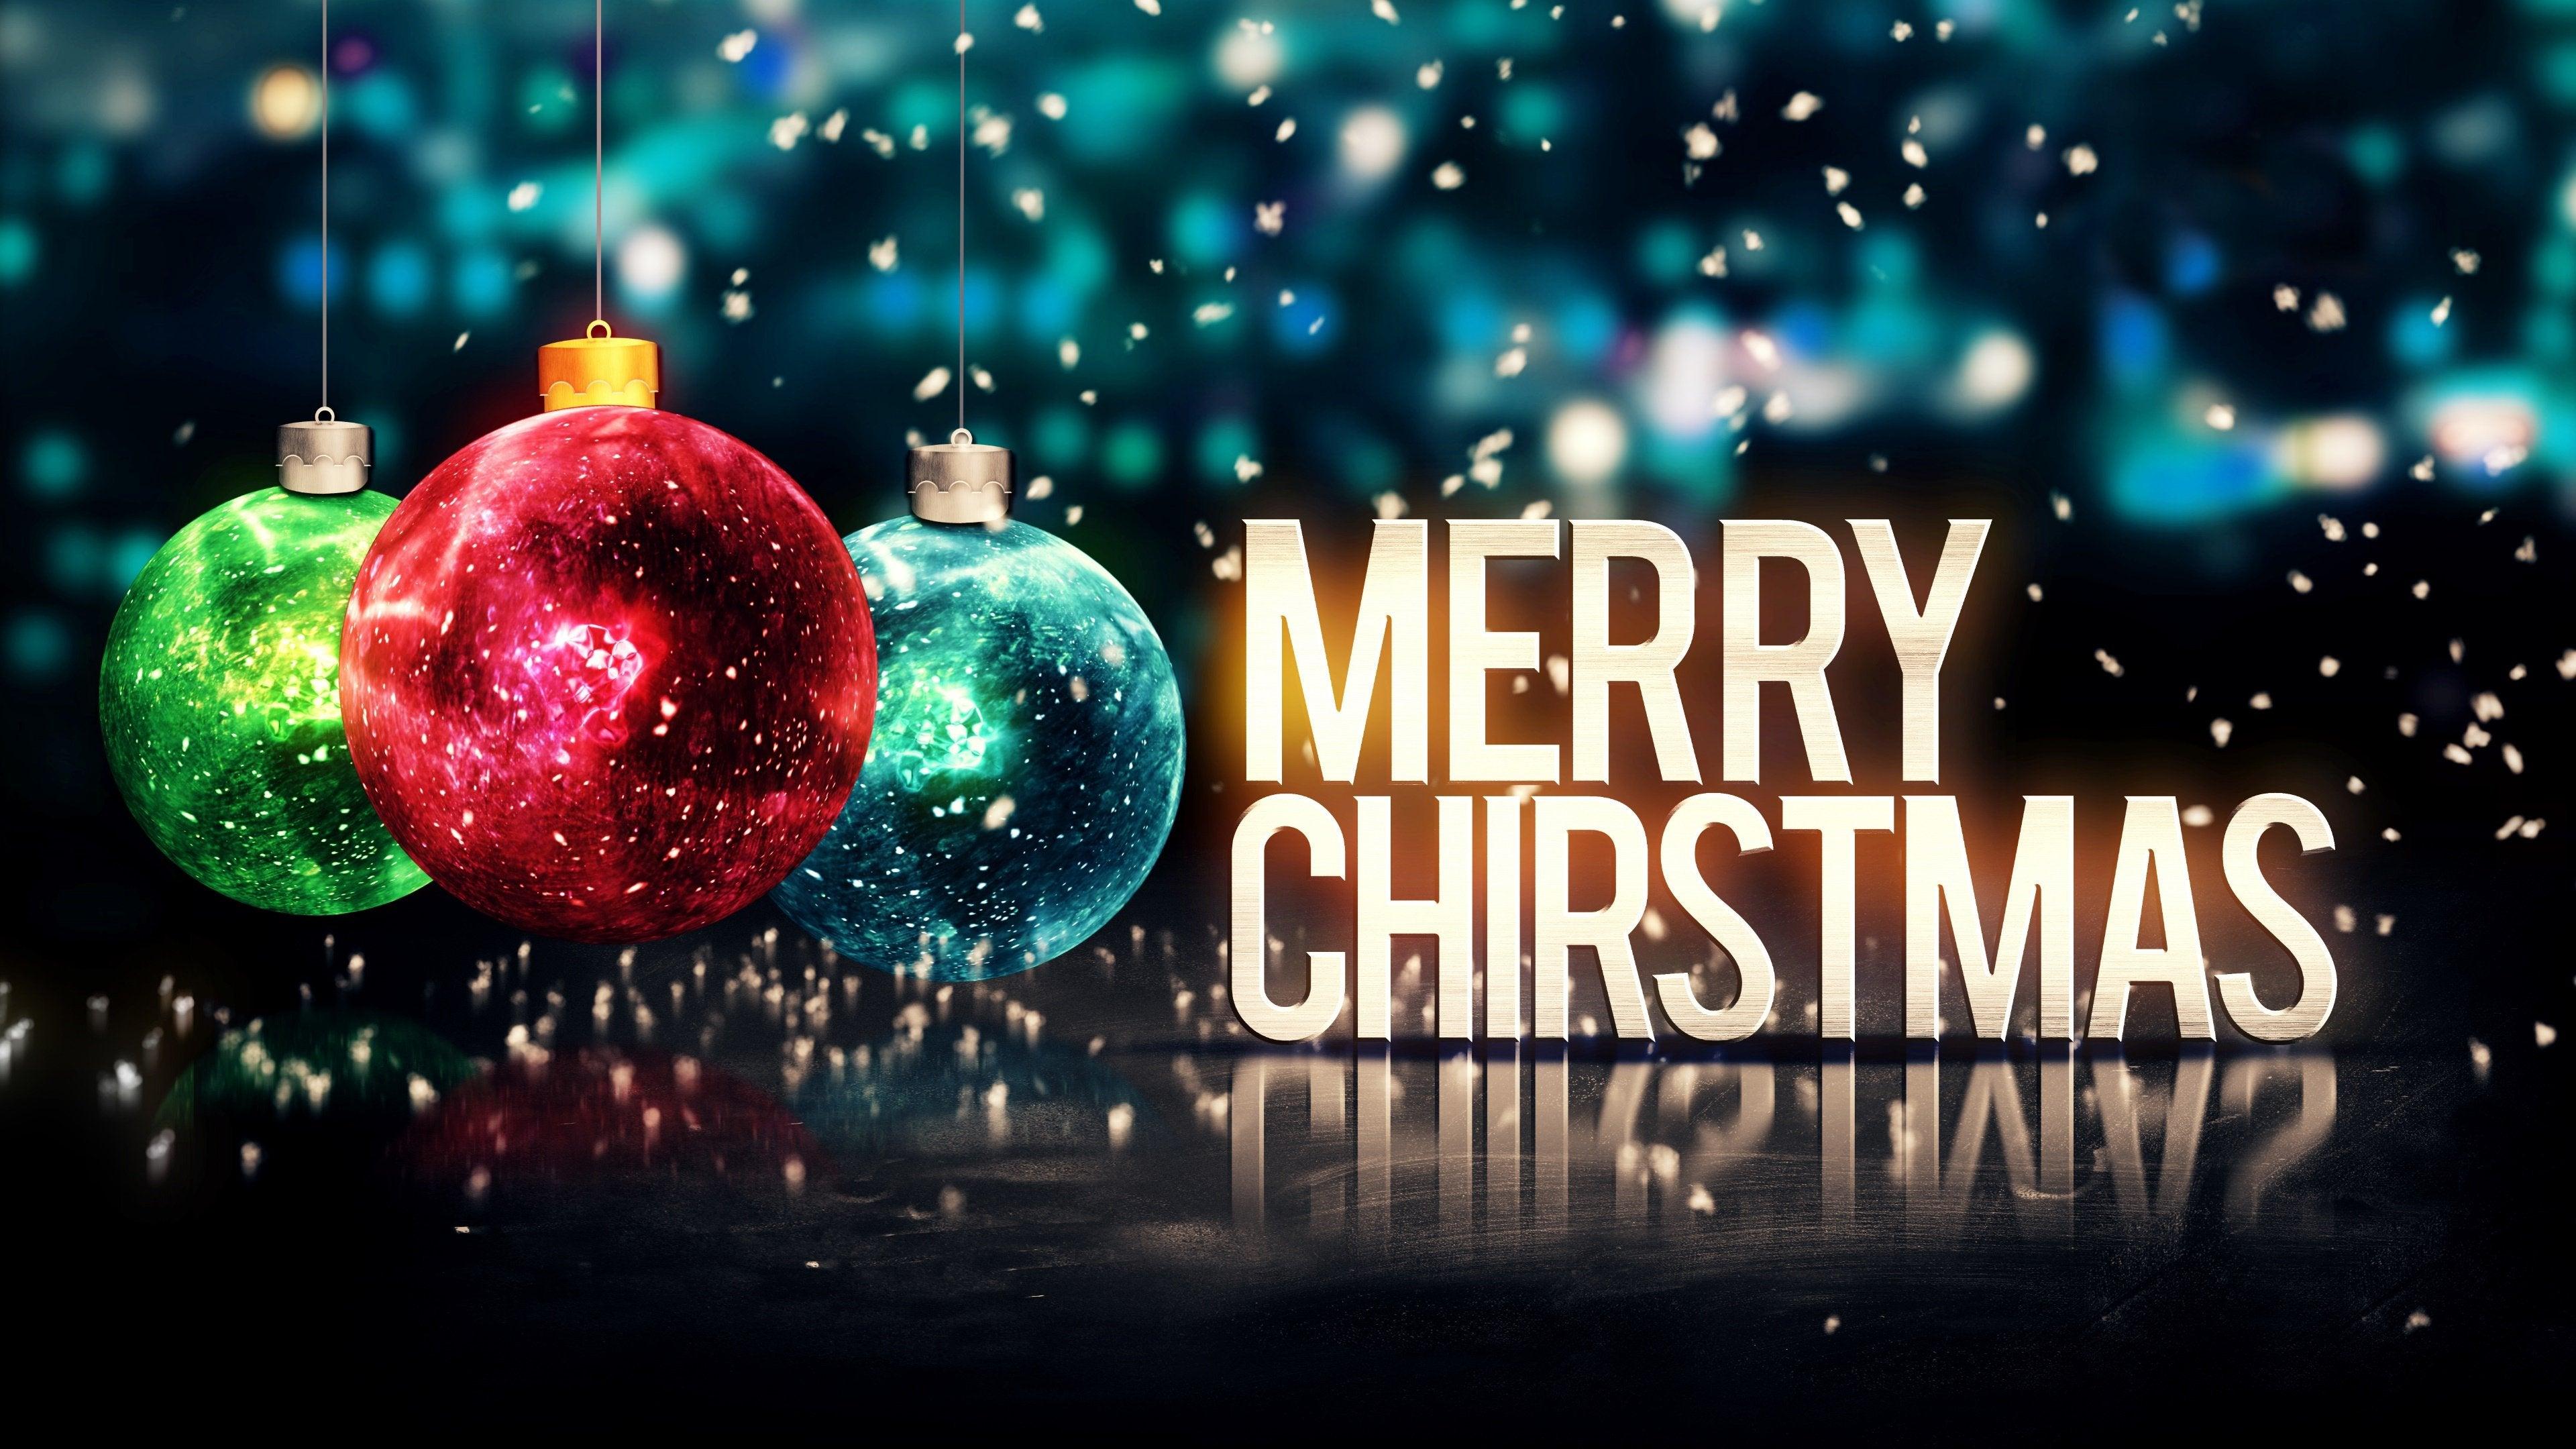 Christmas 4K wallpaper for your desktop or mobile screen free and easy to download